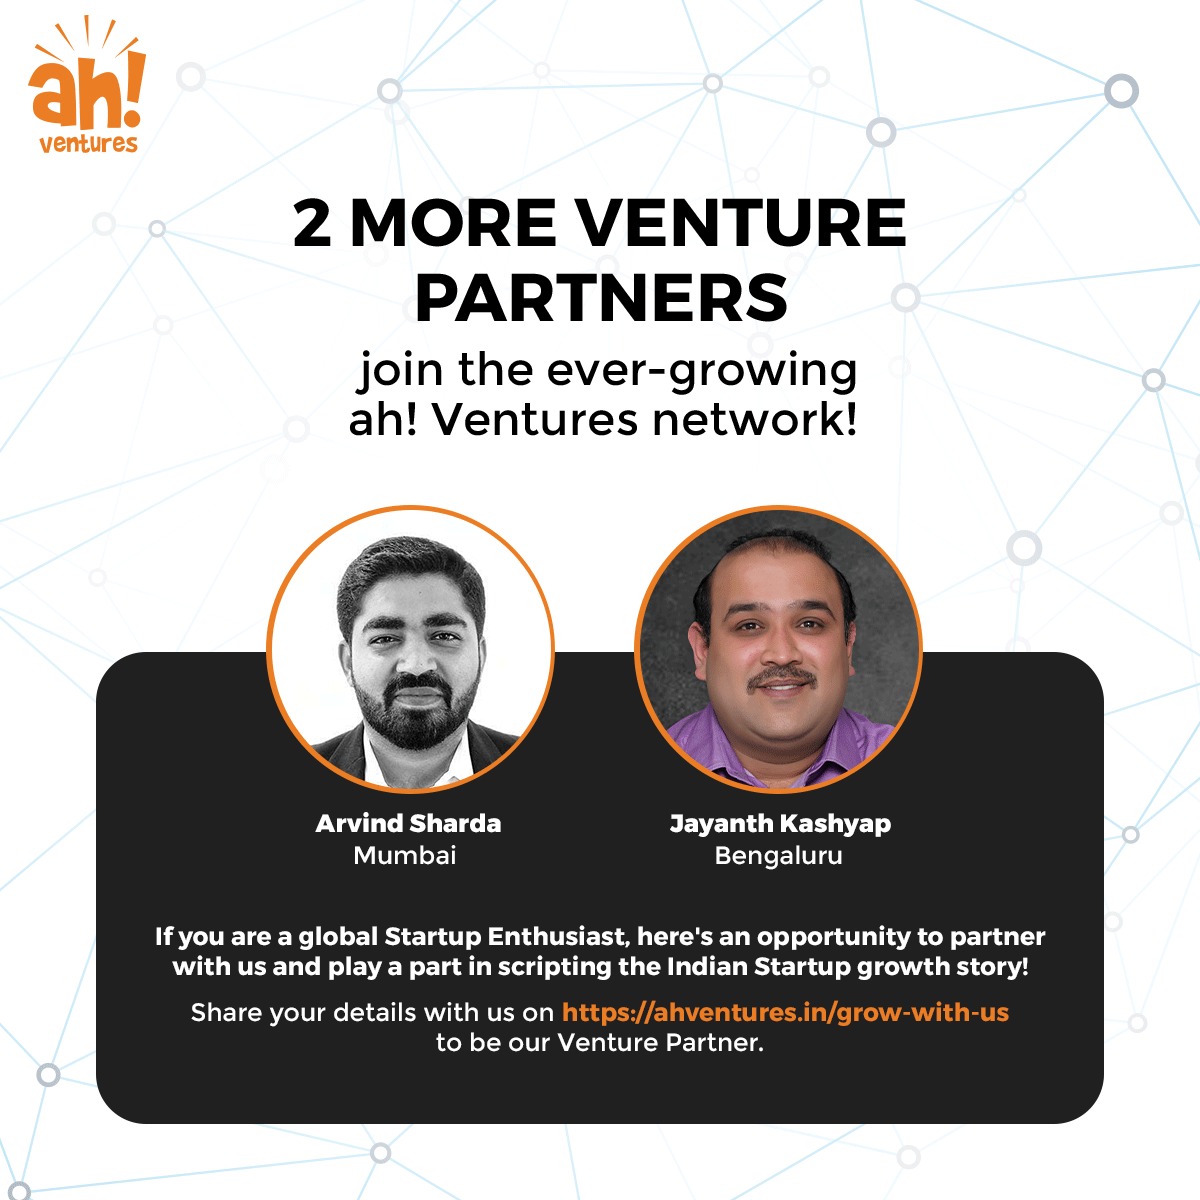 ah! Ventures on X: It is our utmost pleasure to introduce our two newest  Venture Partners - Arvind Sharda from Mumbai and Jayanth Kashyap from  Bengaluru. For becoming a Venture Partner with